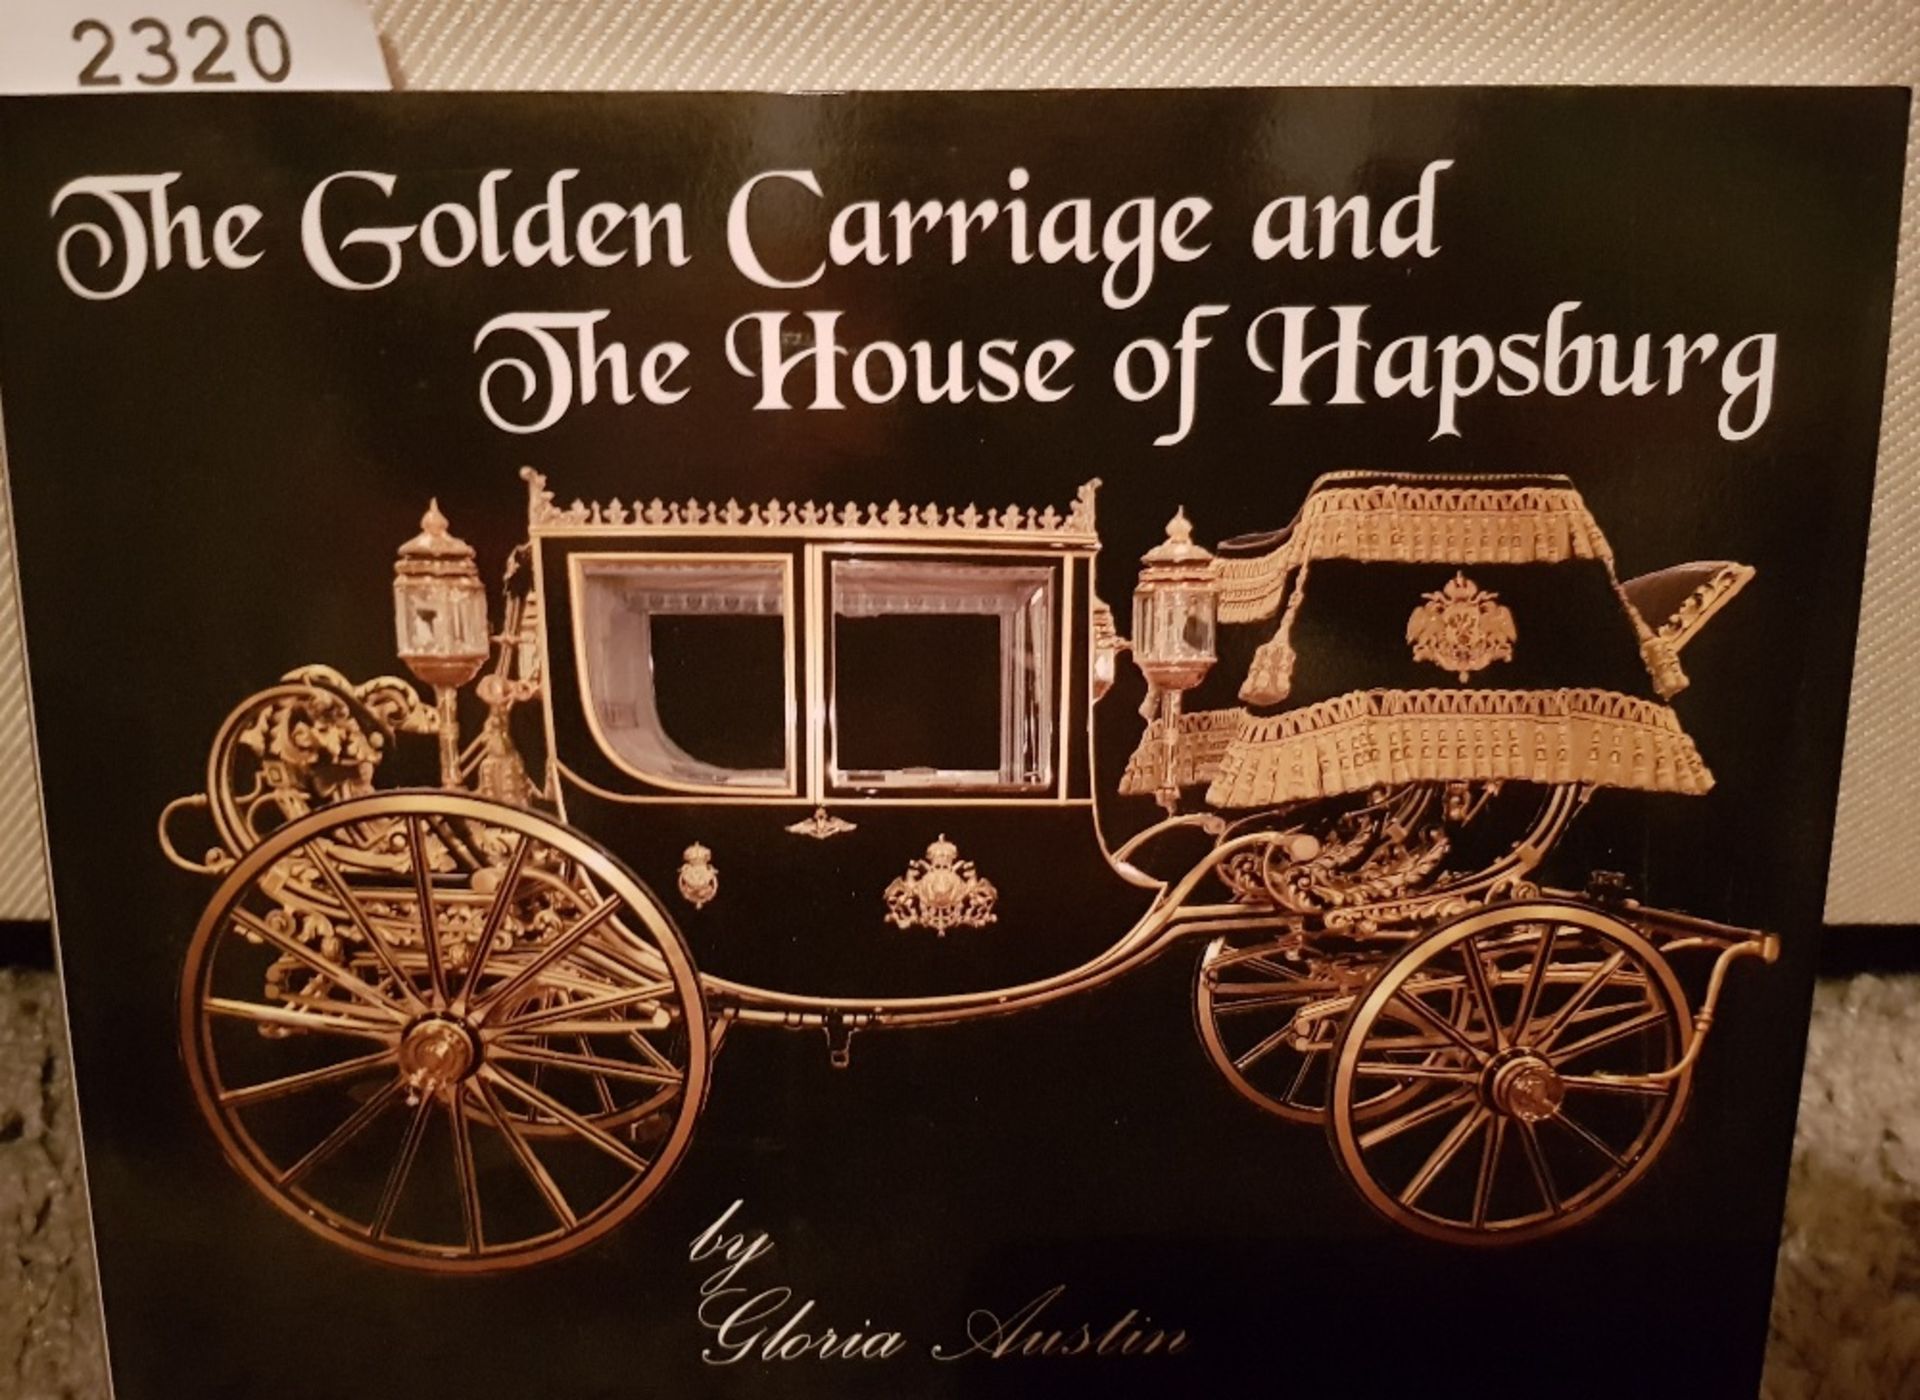 The Golden Carriage and the House of Hapsburg by Gloria Austin